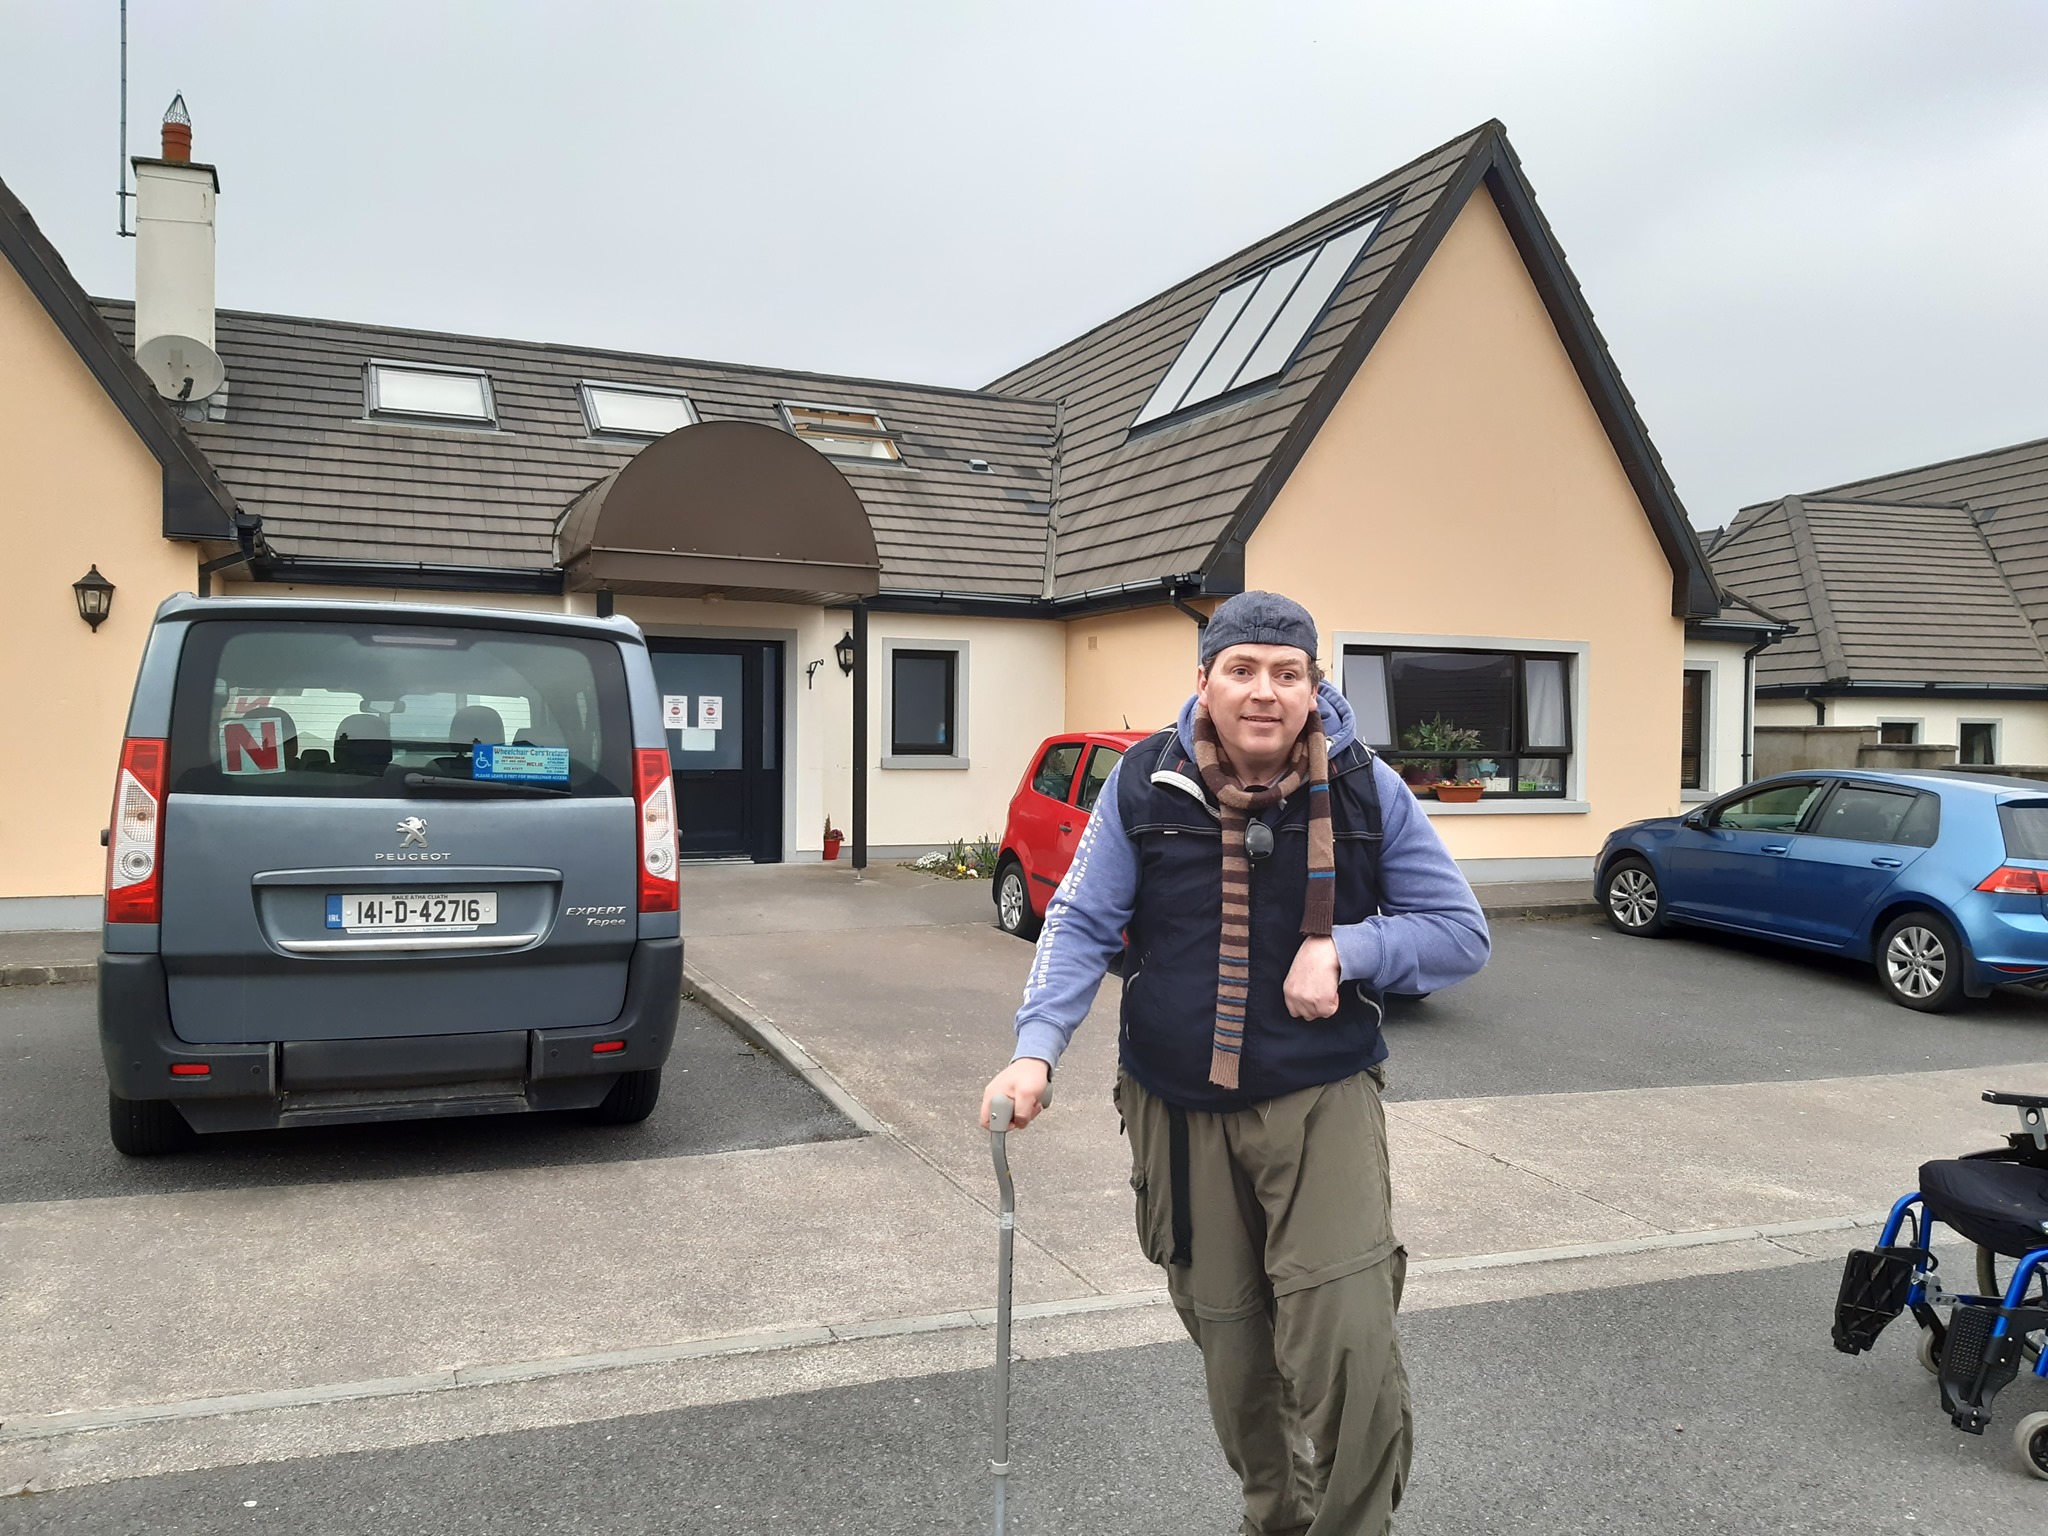 brain injury survivor Brian Hogan makes the most of cocooning to take up a walkathon in aid of Acquired Brain Injury Ireland